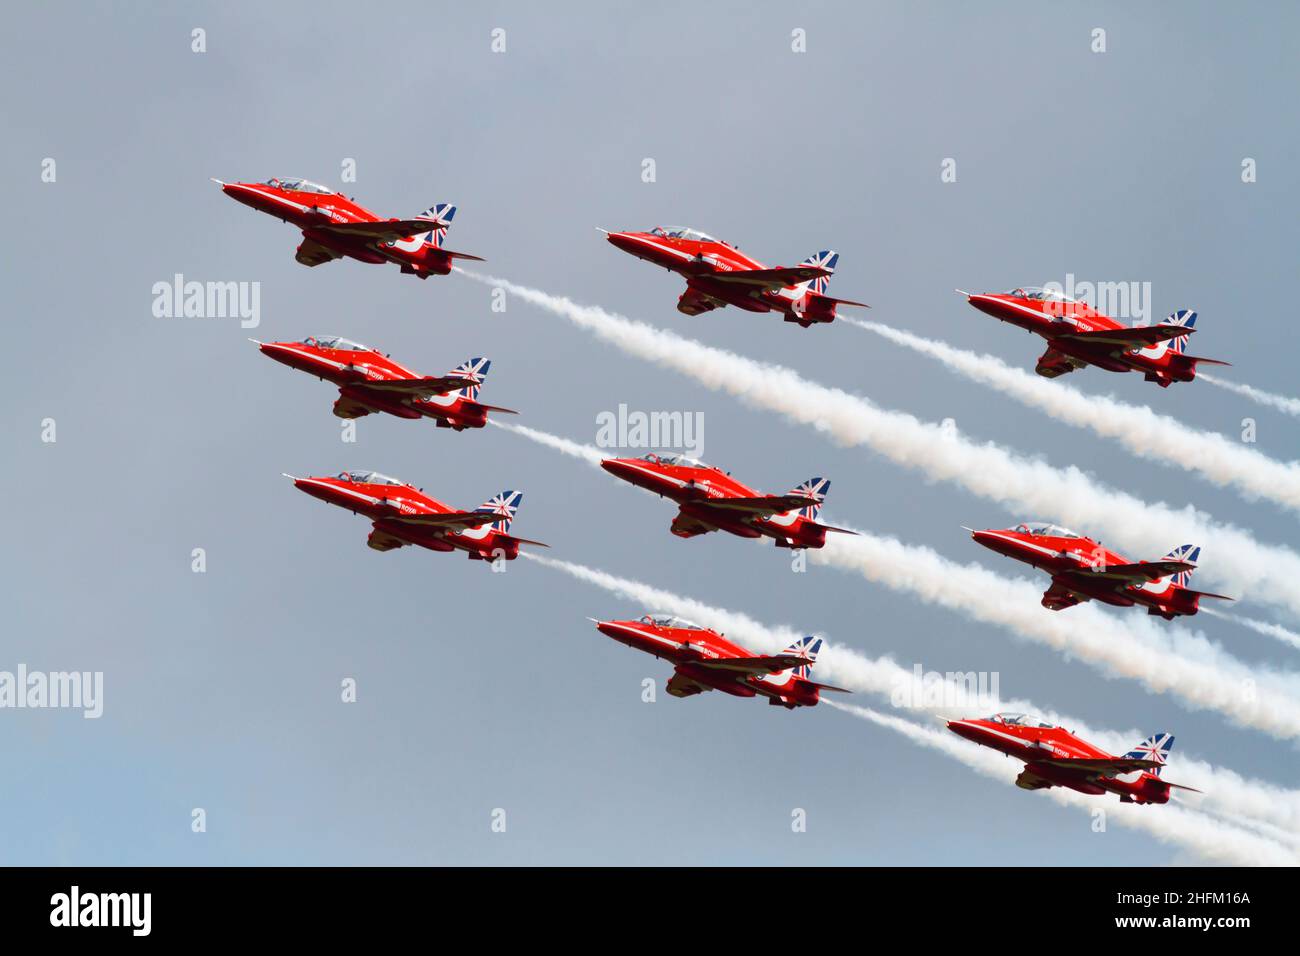 Diamond Nine formation, BAE Hawk T1a aircraft of the Royal Air Force aerobatic display team, The Red Arrows, with the 50th Anniversity tail markings. Stock Photo